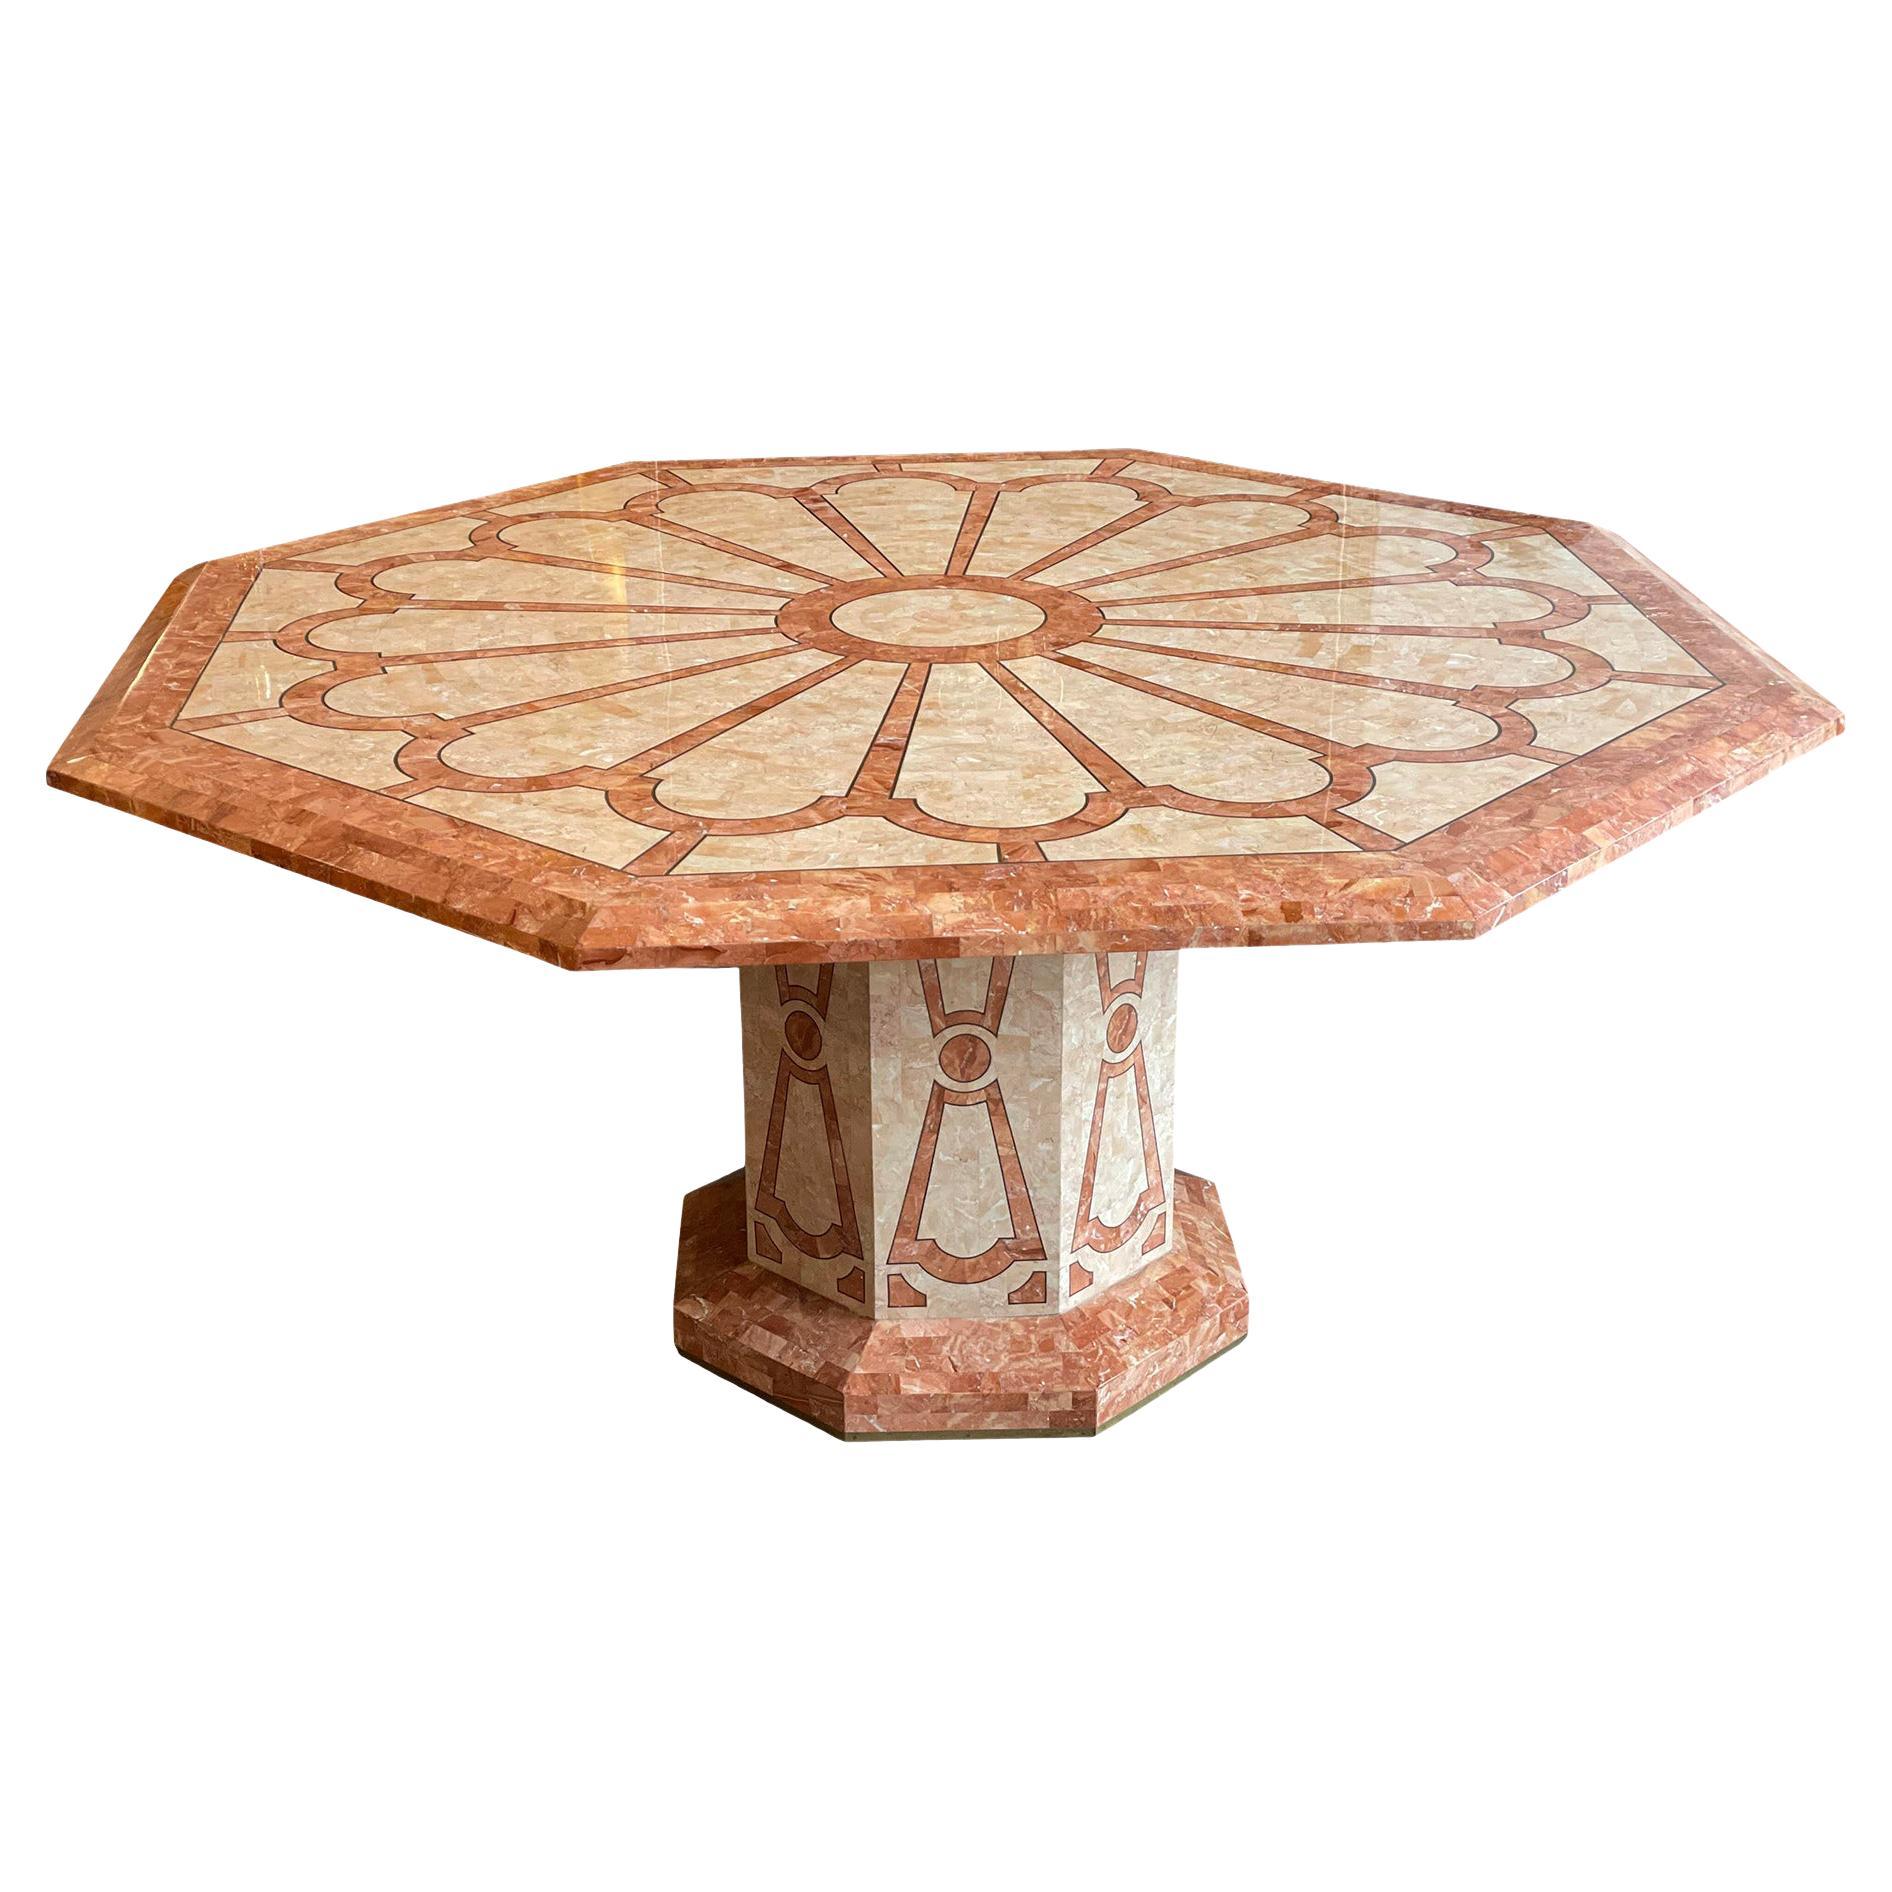 Maitland Smith Fossilized Coral Tessellated Stone Dining Table